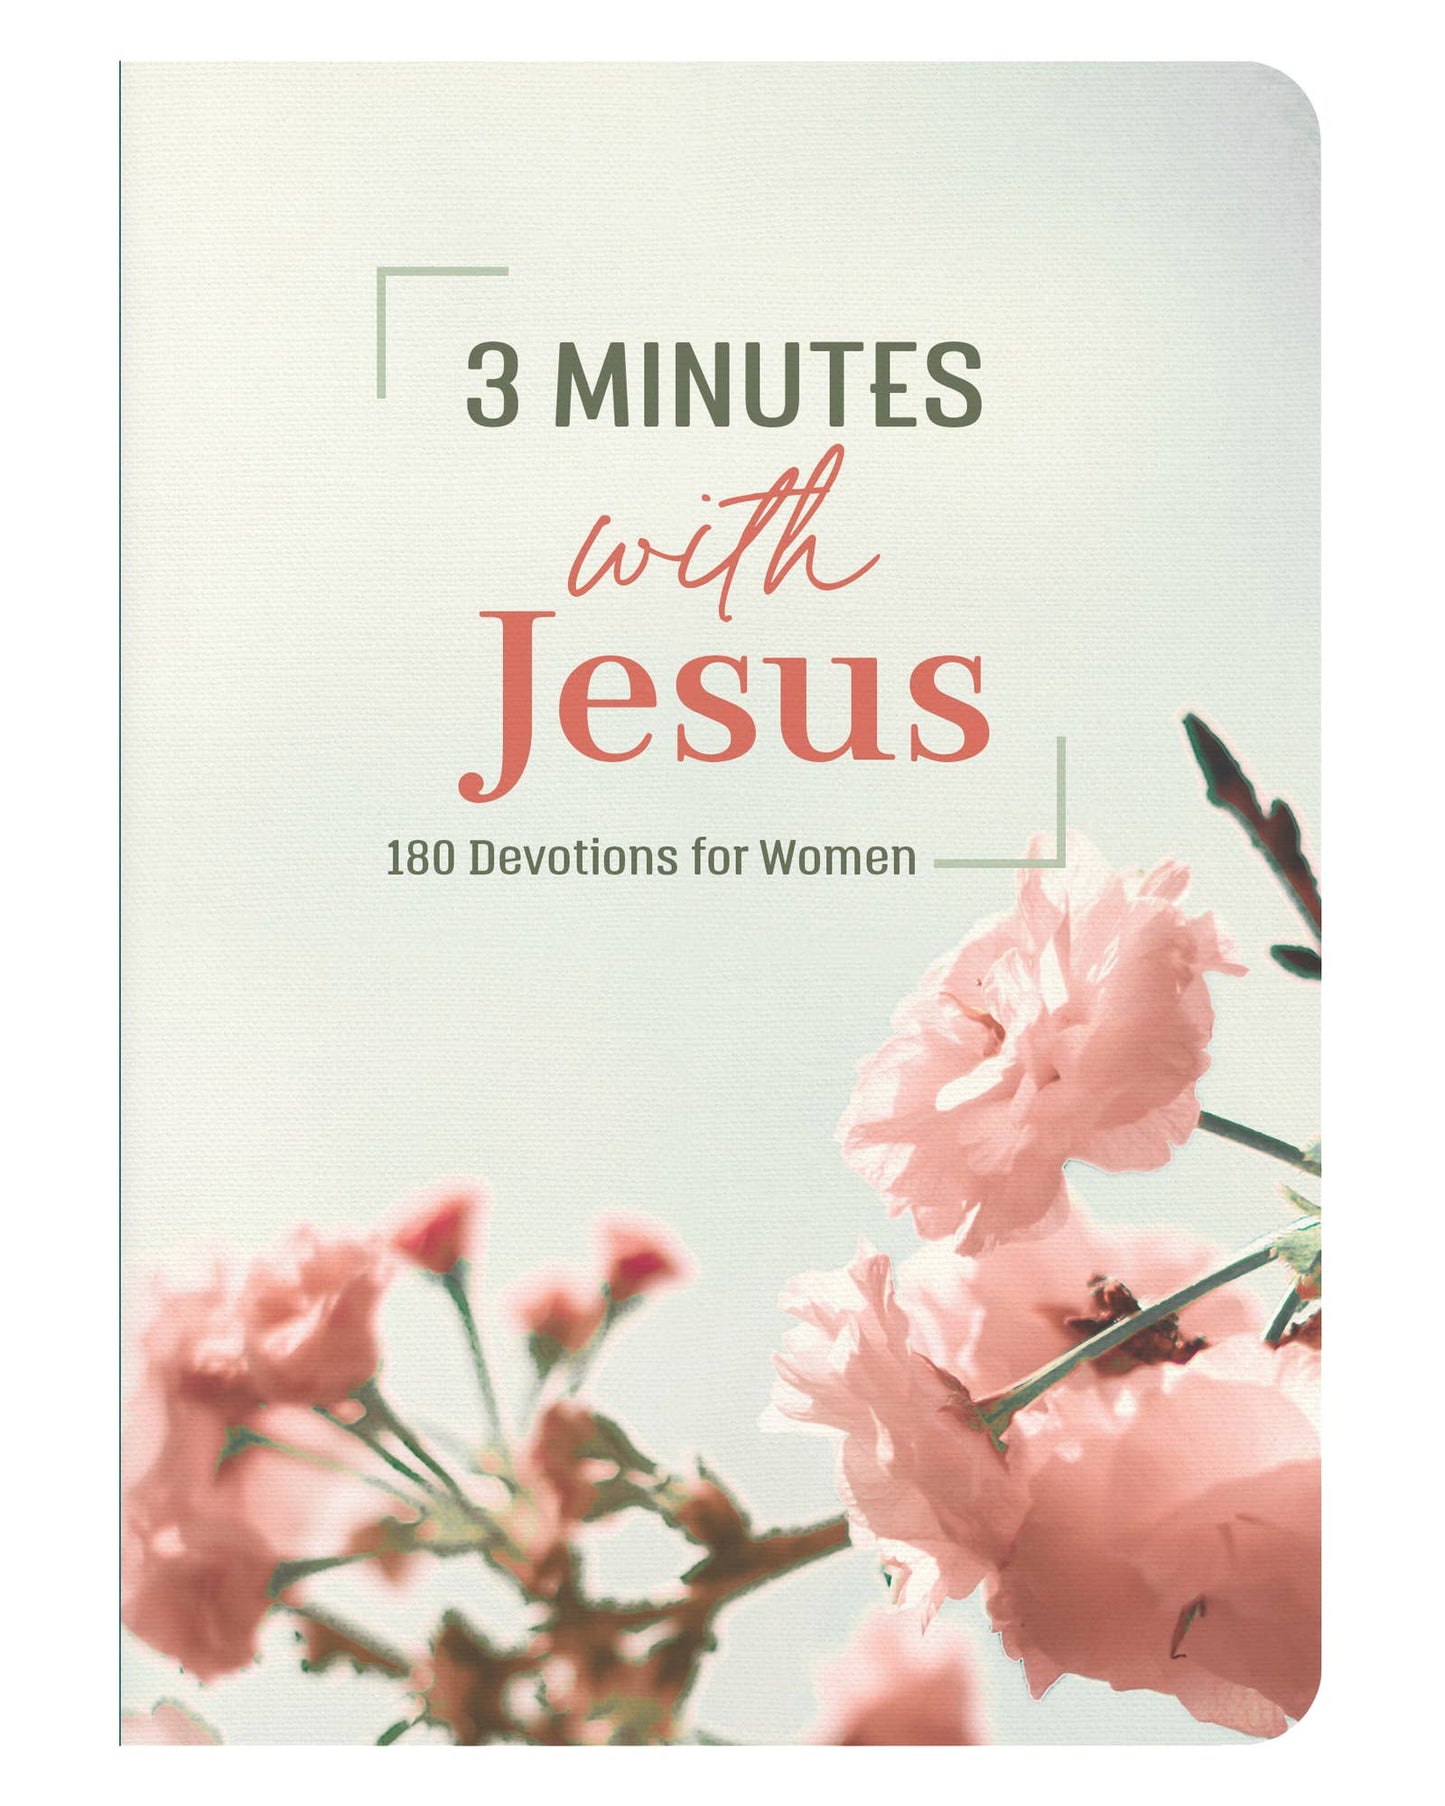 3 Minutes with Jesus: 180 Devotions for Women